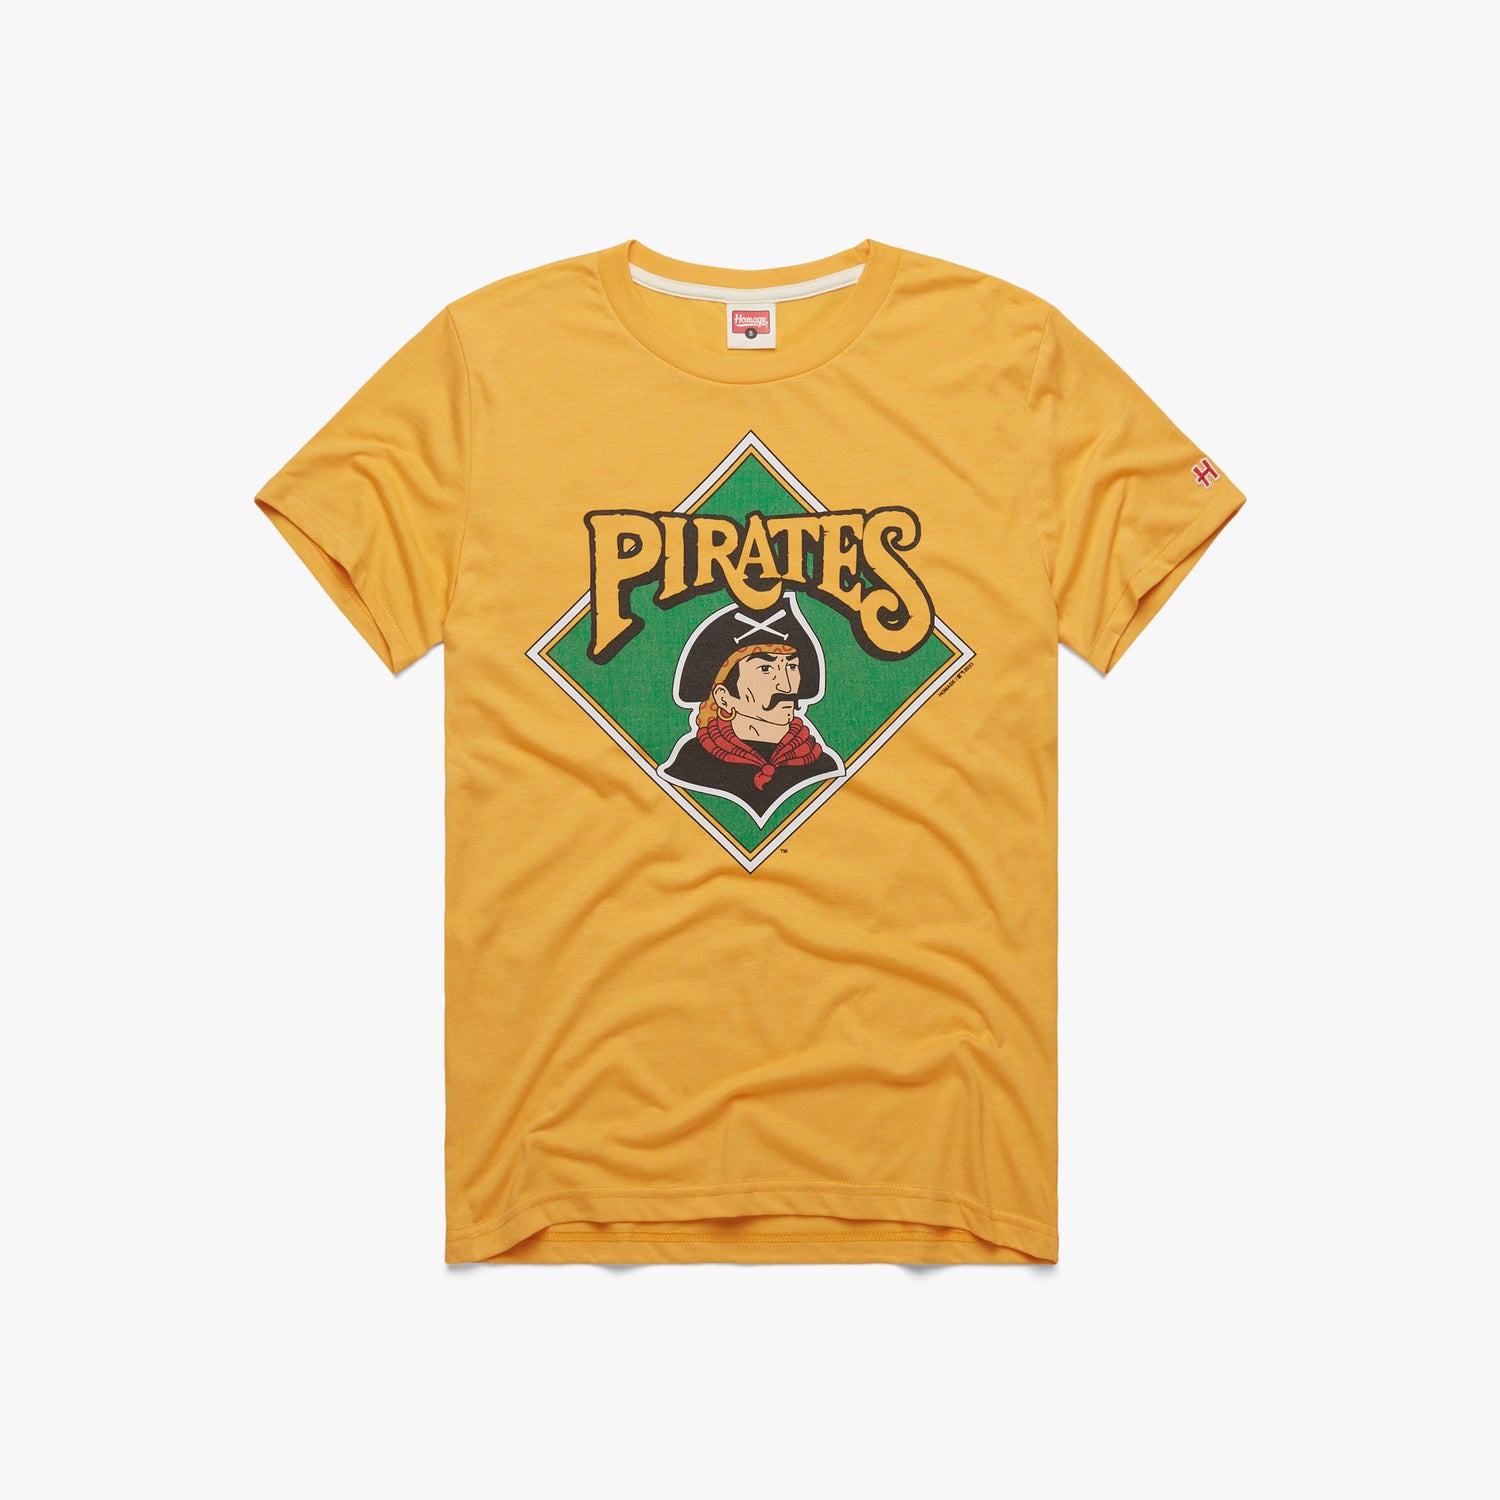 Pittsburgh Pirates '87 T-Shirt from Homage. | Gold | Vintage Apparel from Homage.